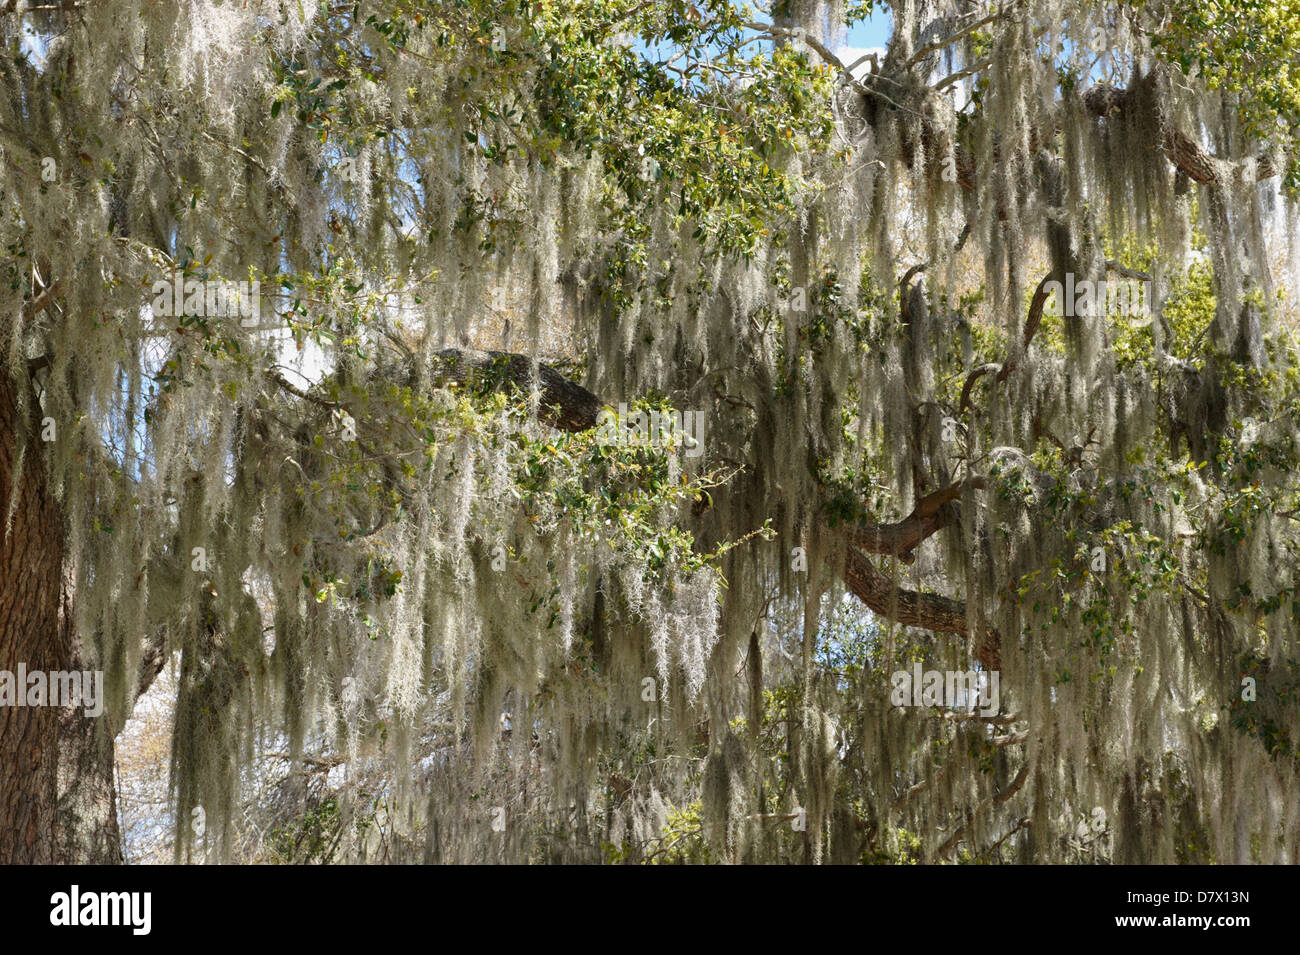 Trees covered in Spanish Moss (Tillandsia usneoides), Florida, USA Stock Photo